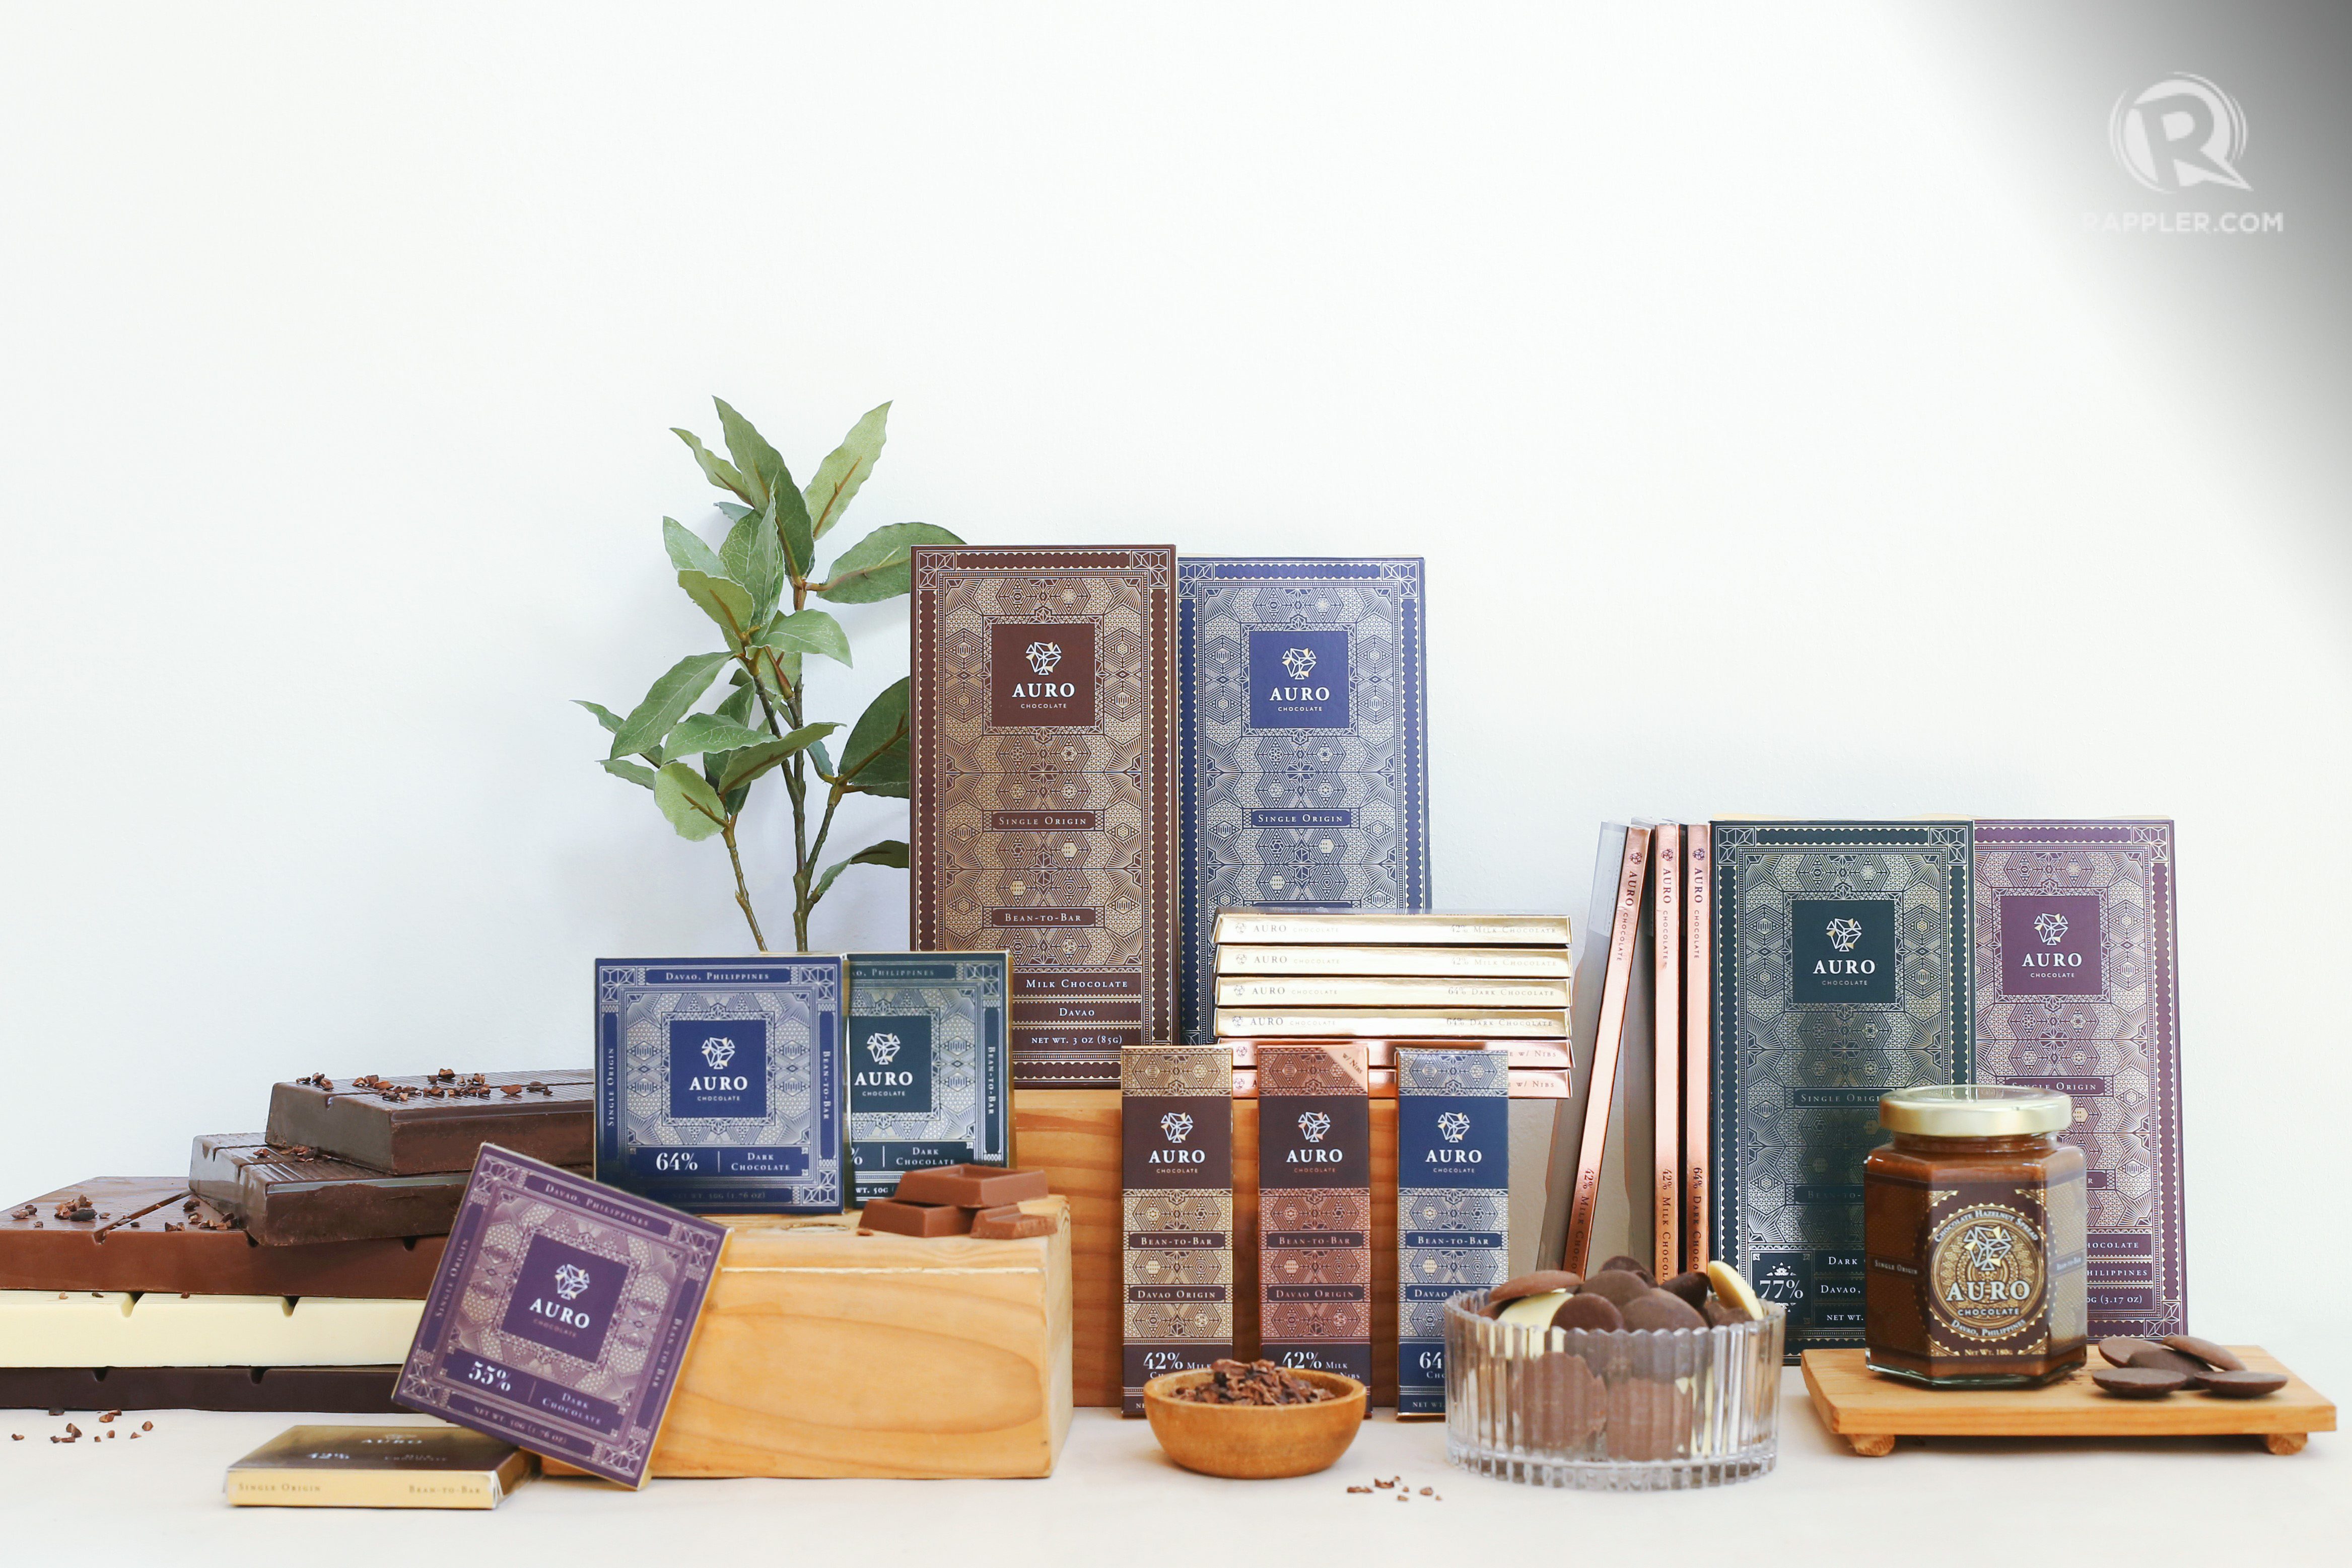 WHAT TO GET. Auro Chocolate features a wide range of chocolate products.  